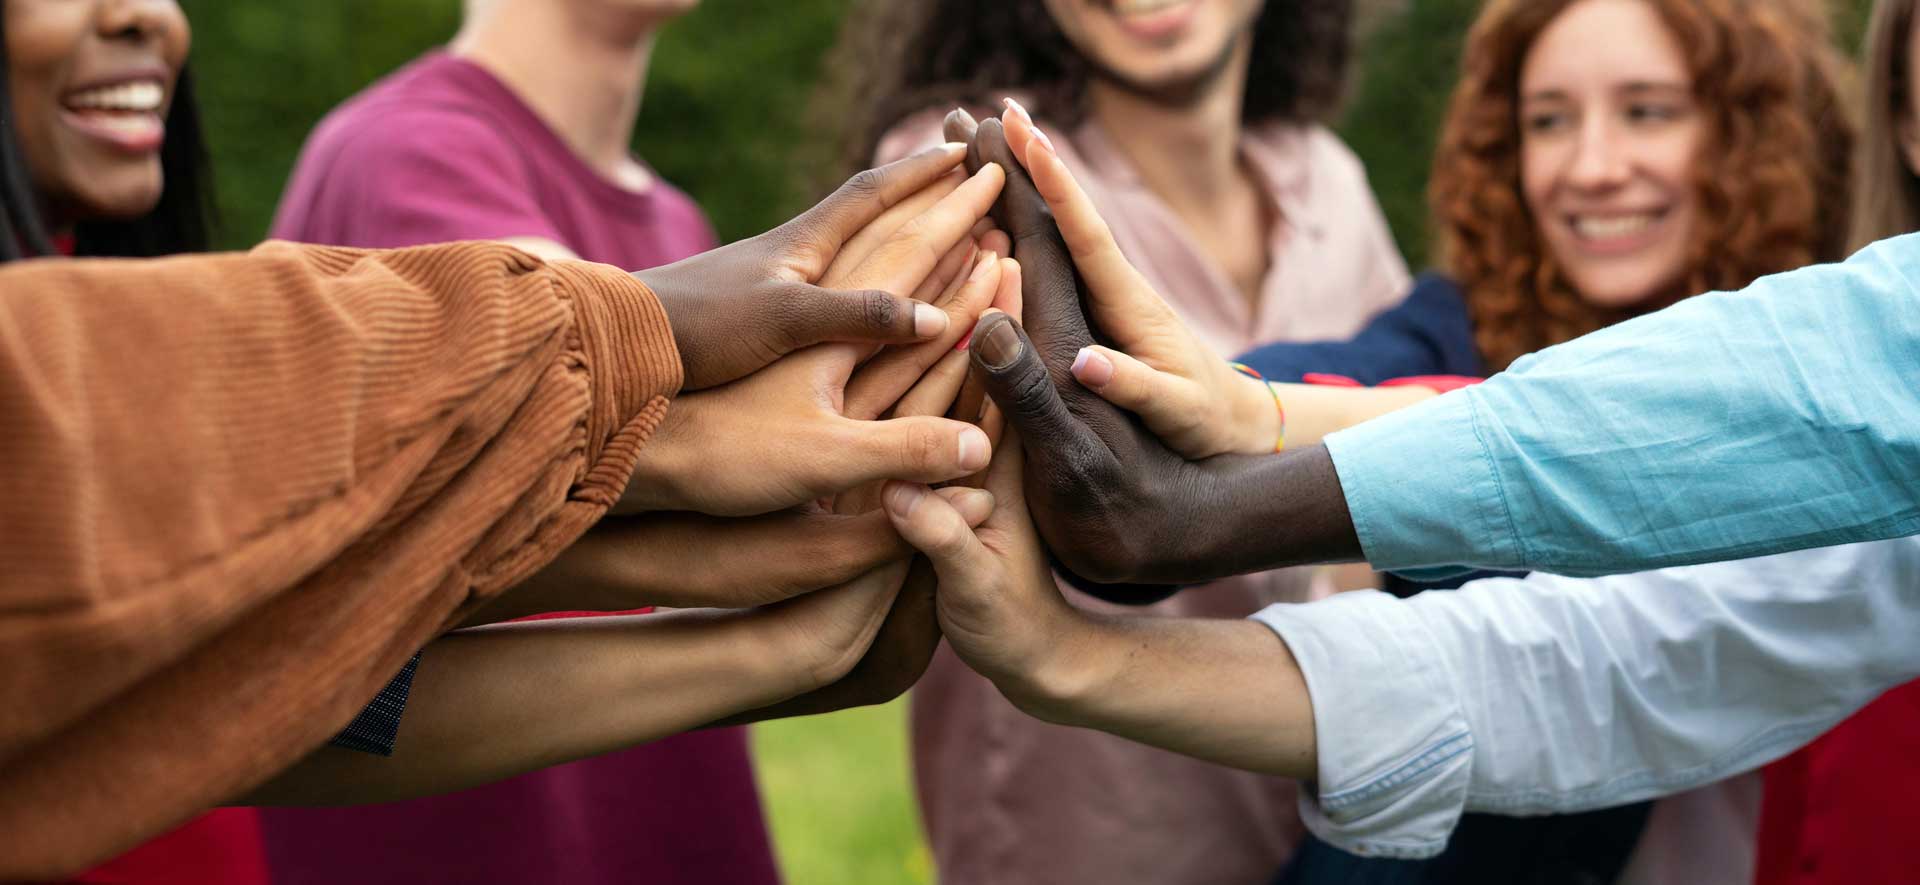 A diverse group clasps hands to showcase teamwork